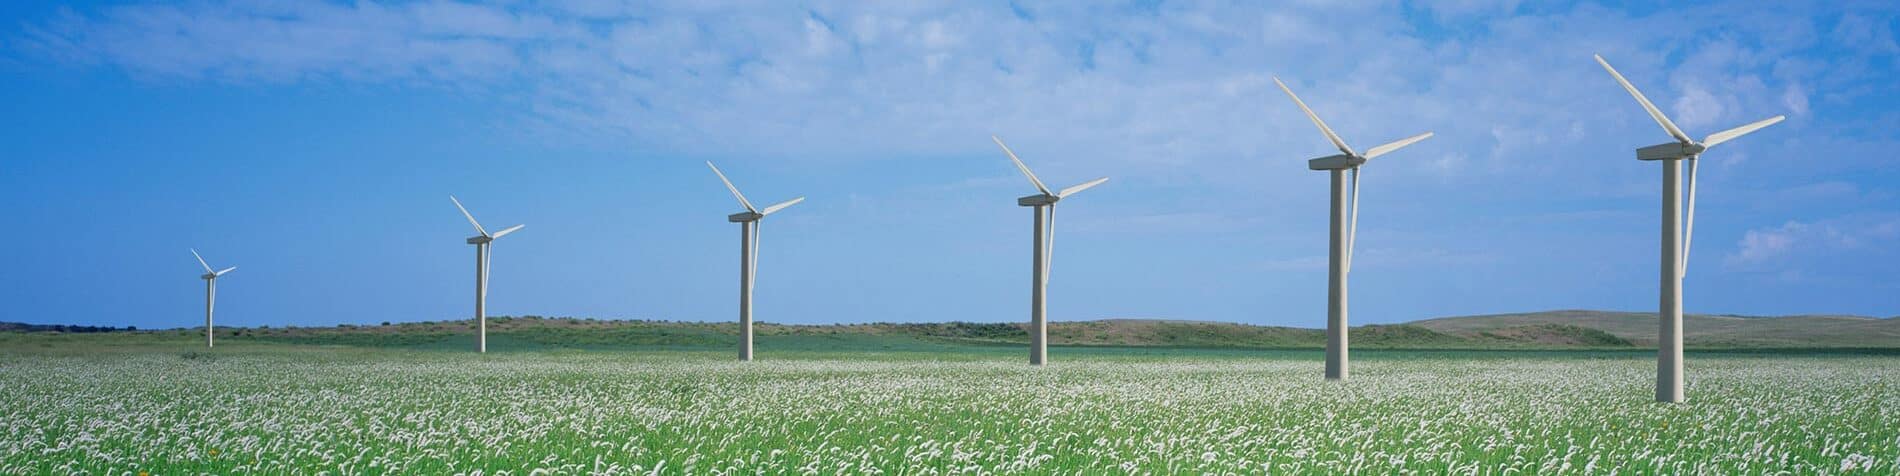 Accelerating the Sustainable Energy Transition with SAP’s Industry Cloud